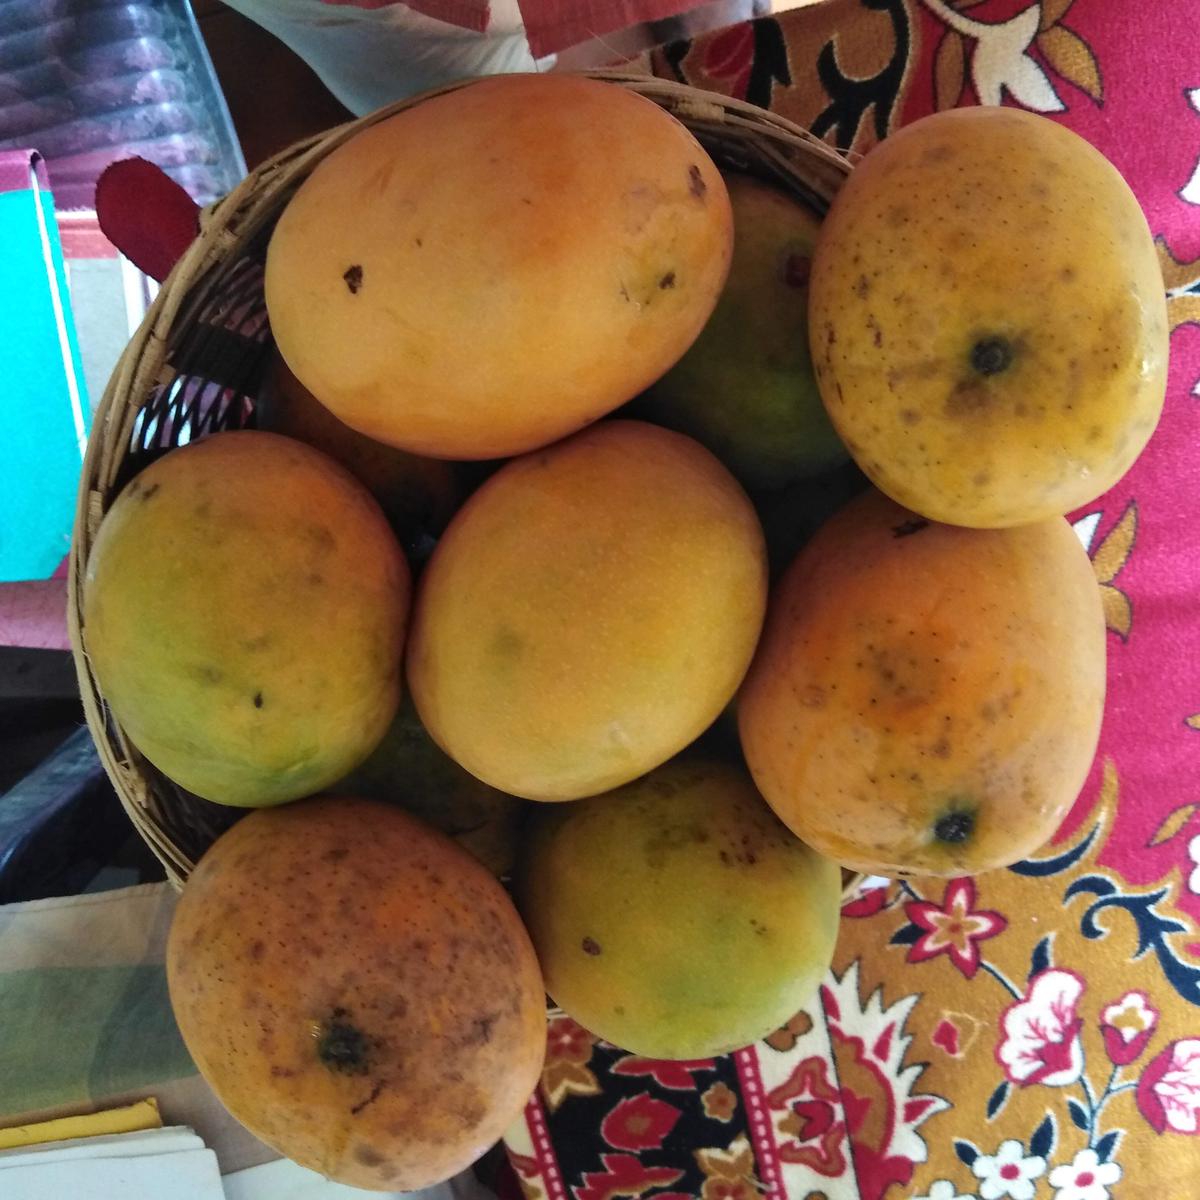 Efforts are being taken to make value-added products from the mango